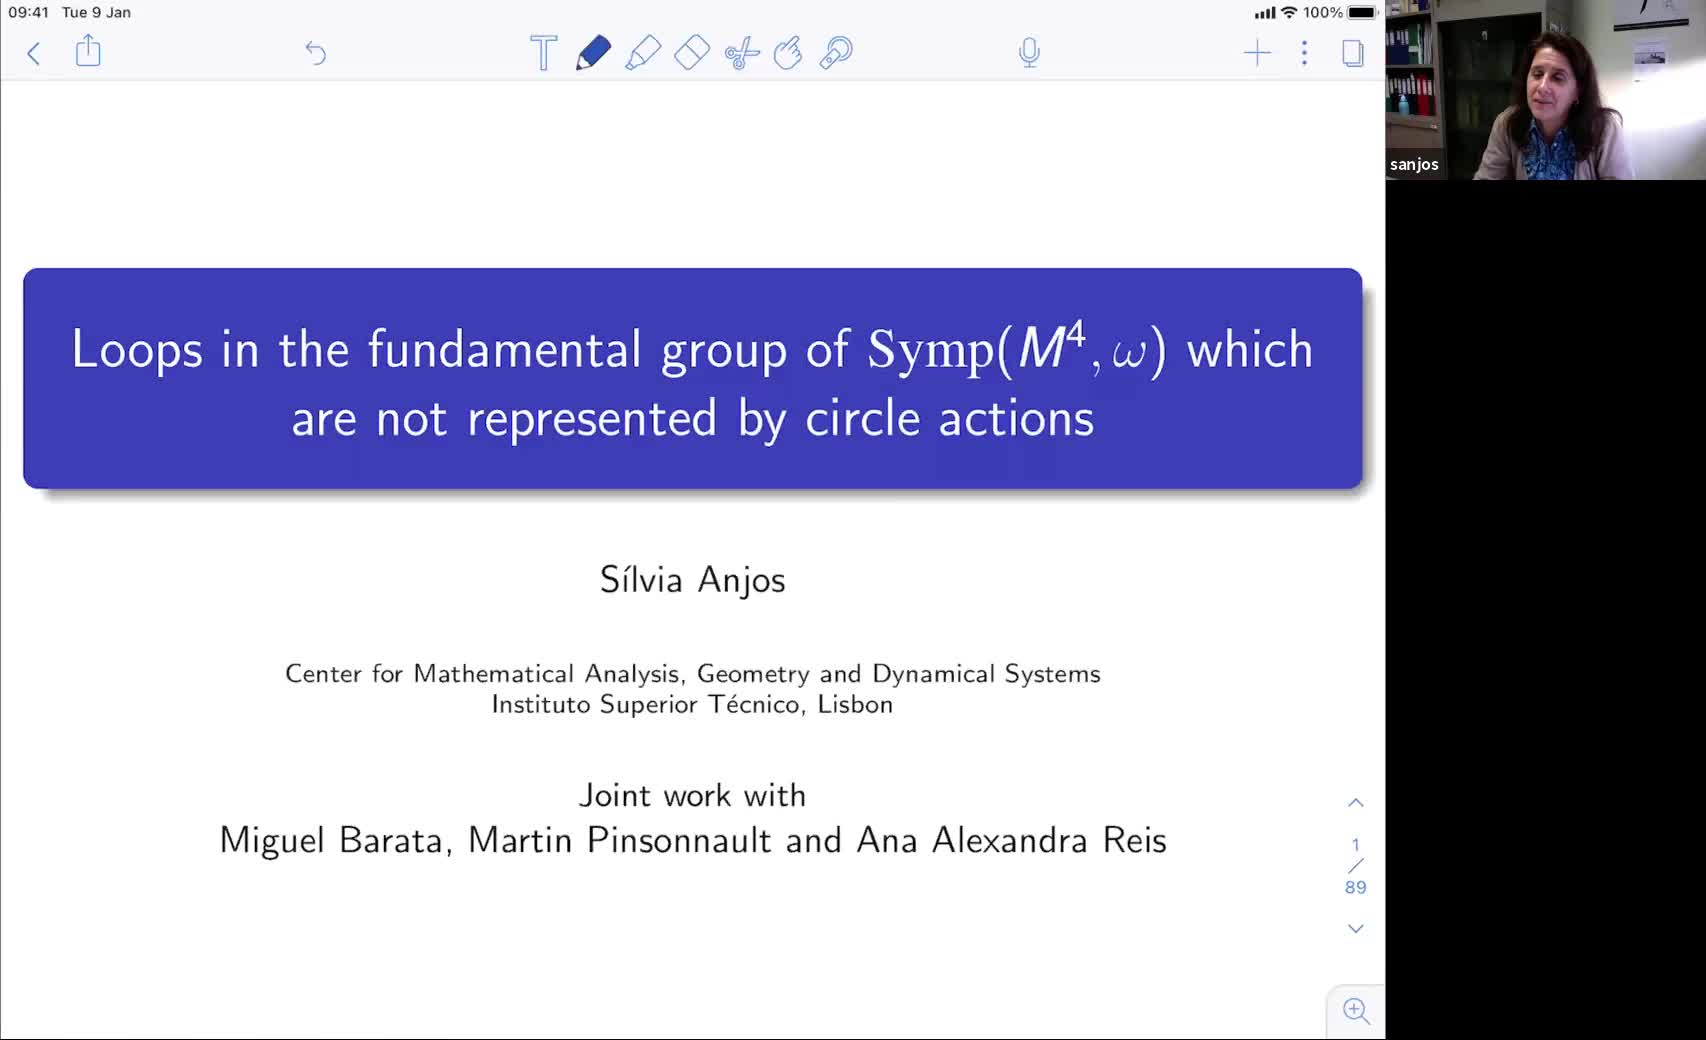 2020.11.17 Loops in the fundamental group of $\mathrm{Symp}(M,\omega)$ which are not represented by circle actions